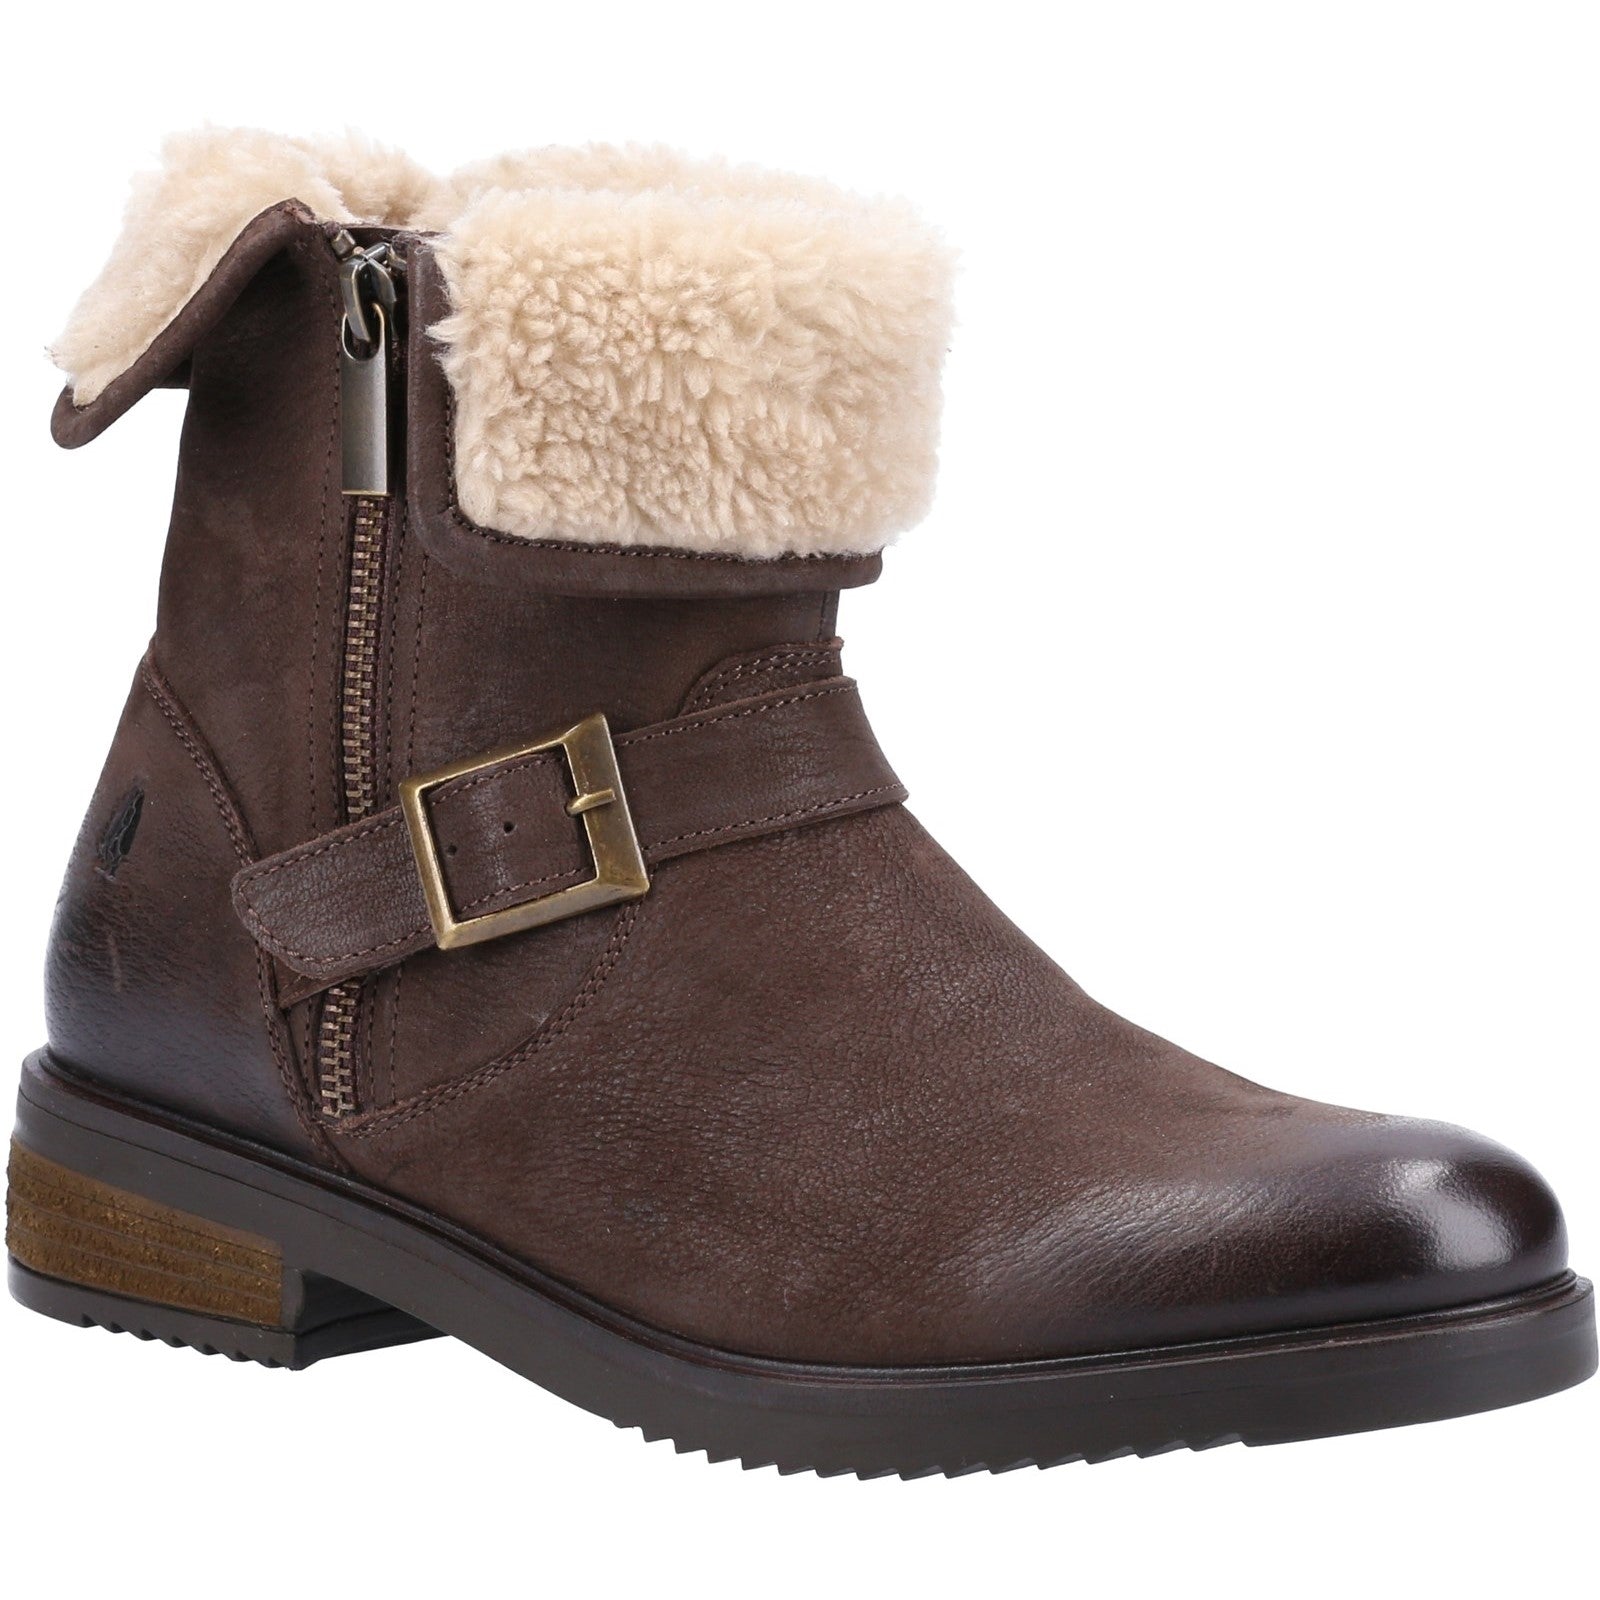 Ladies Mid Boot Brown Hush Puppies Tyler Ankle Boot